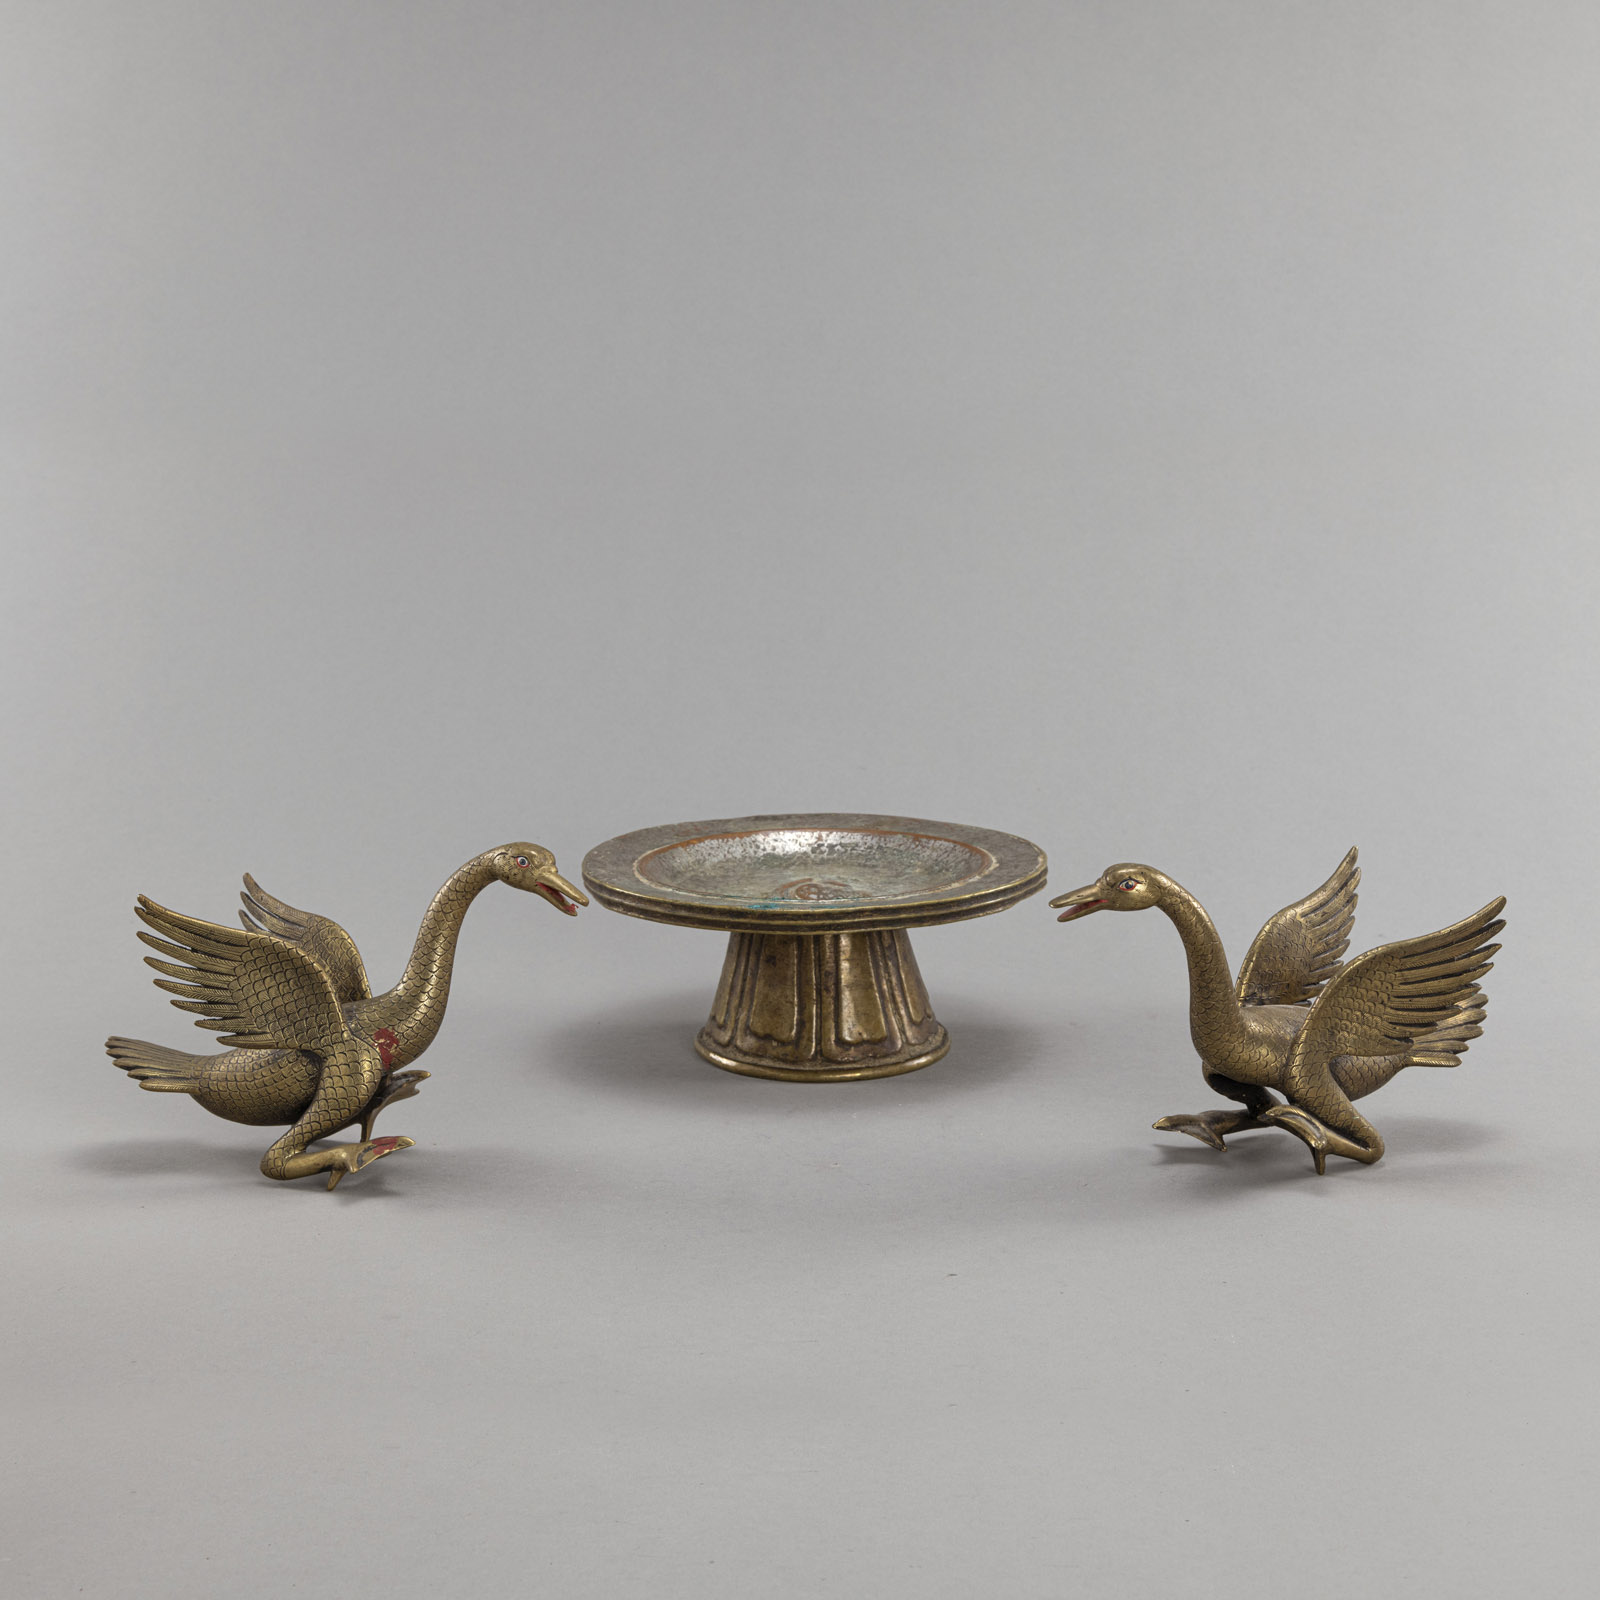 <b>A RITUAL FOOTED DISH AND A PAIR OF BRONZE SWANS</b>